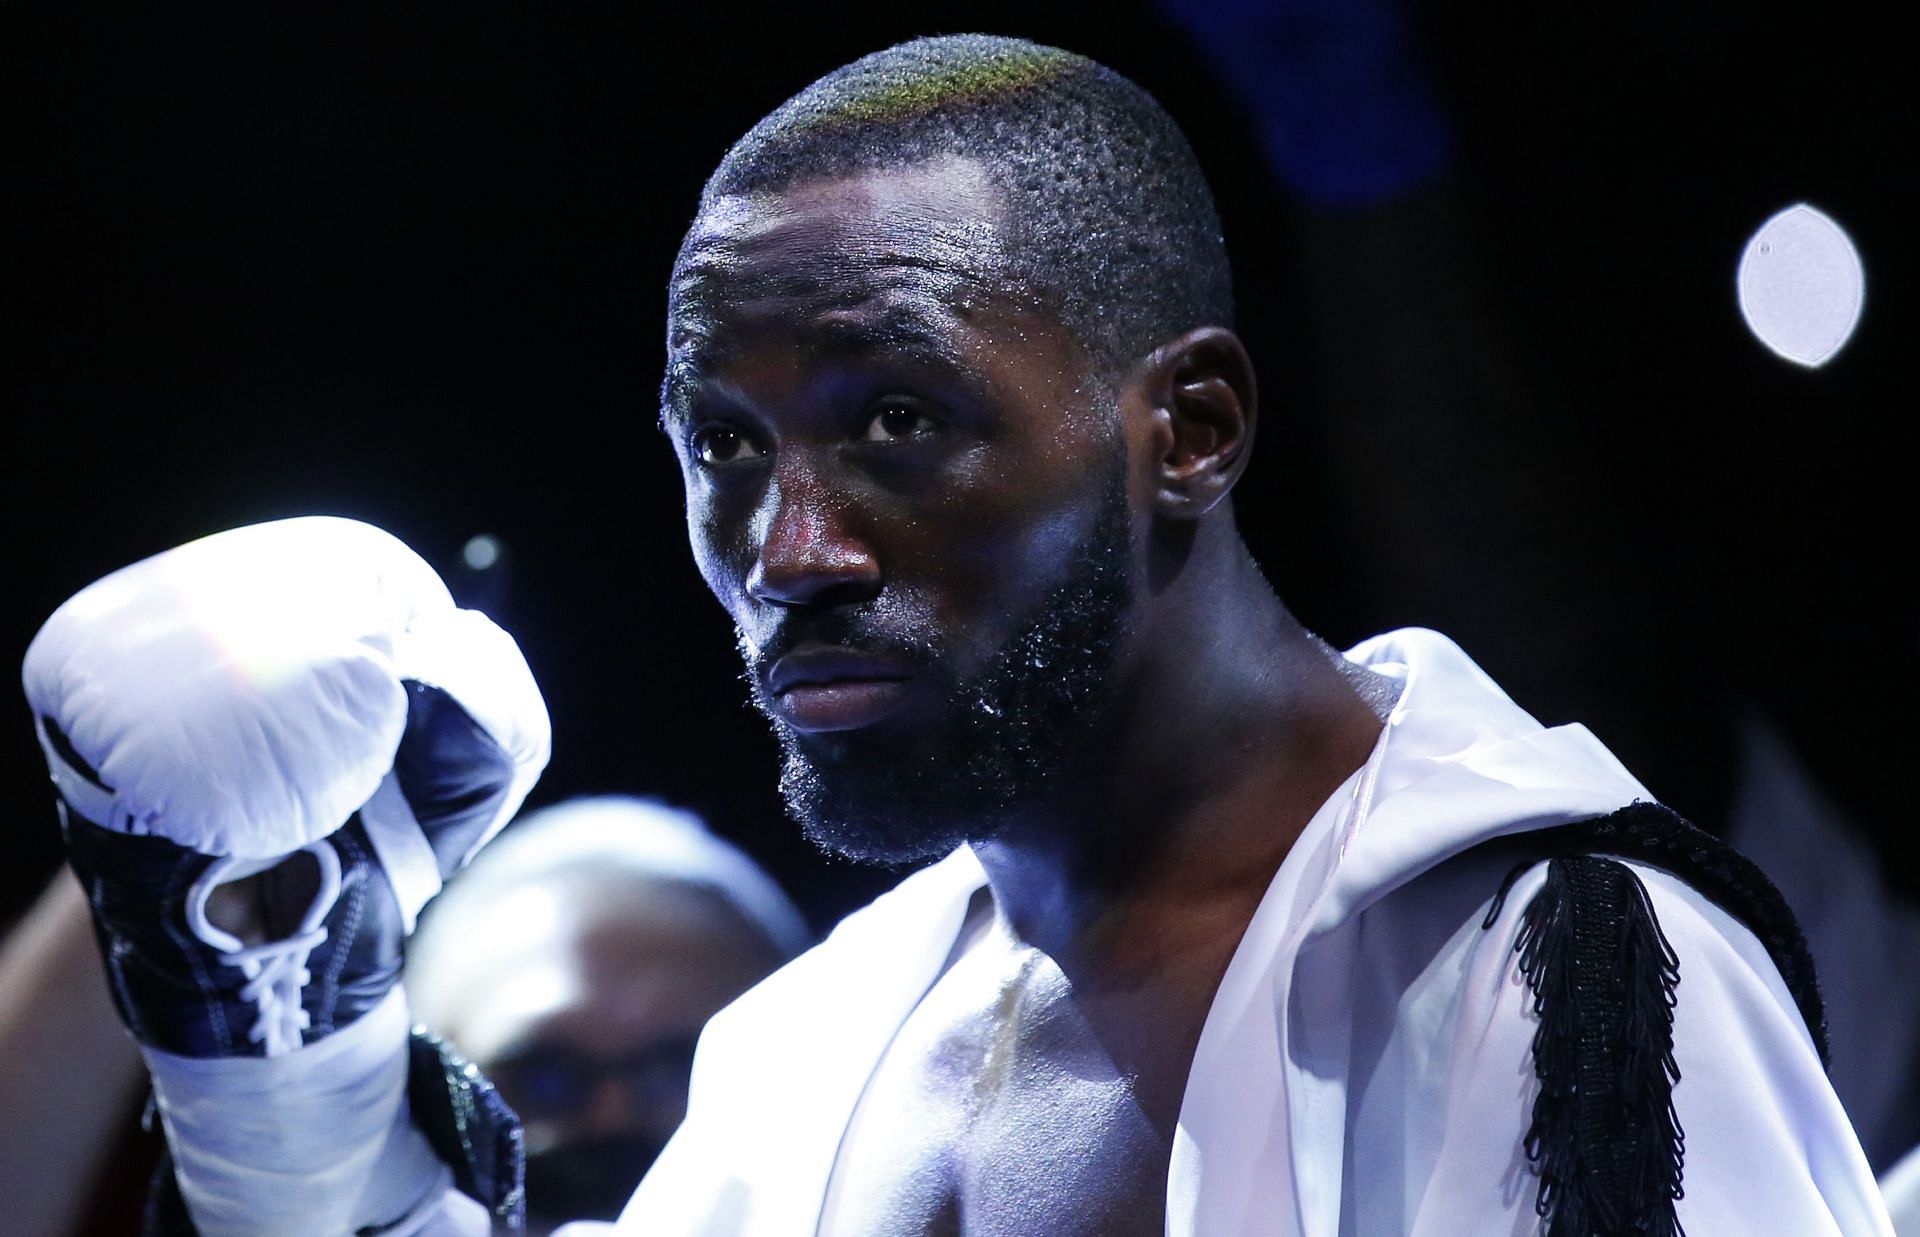 Terence Crawford has expressed his plans to move up in weight.